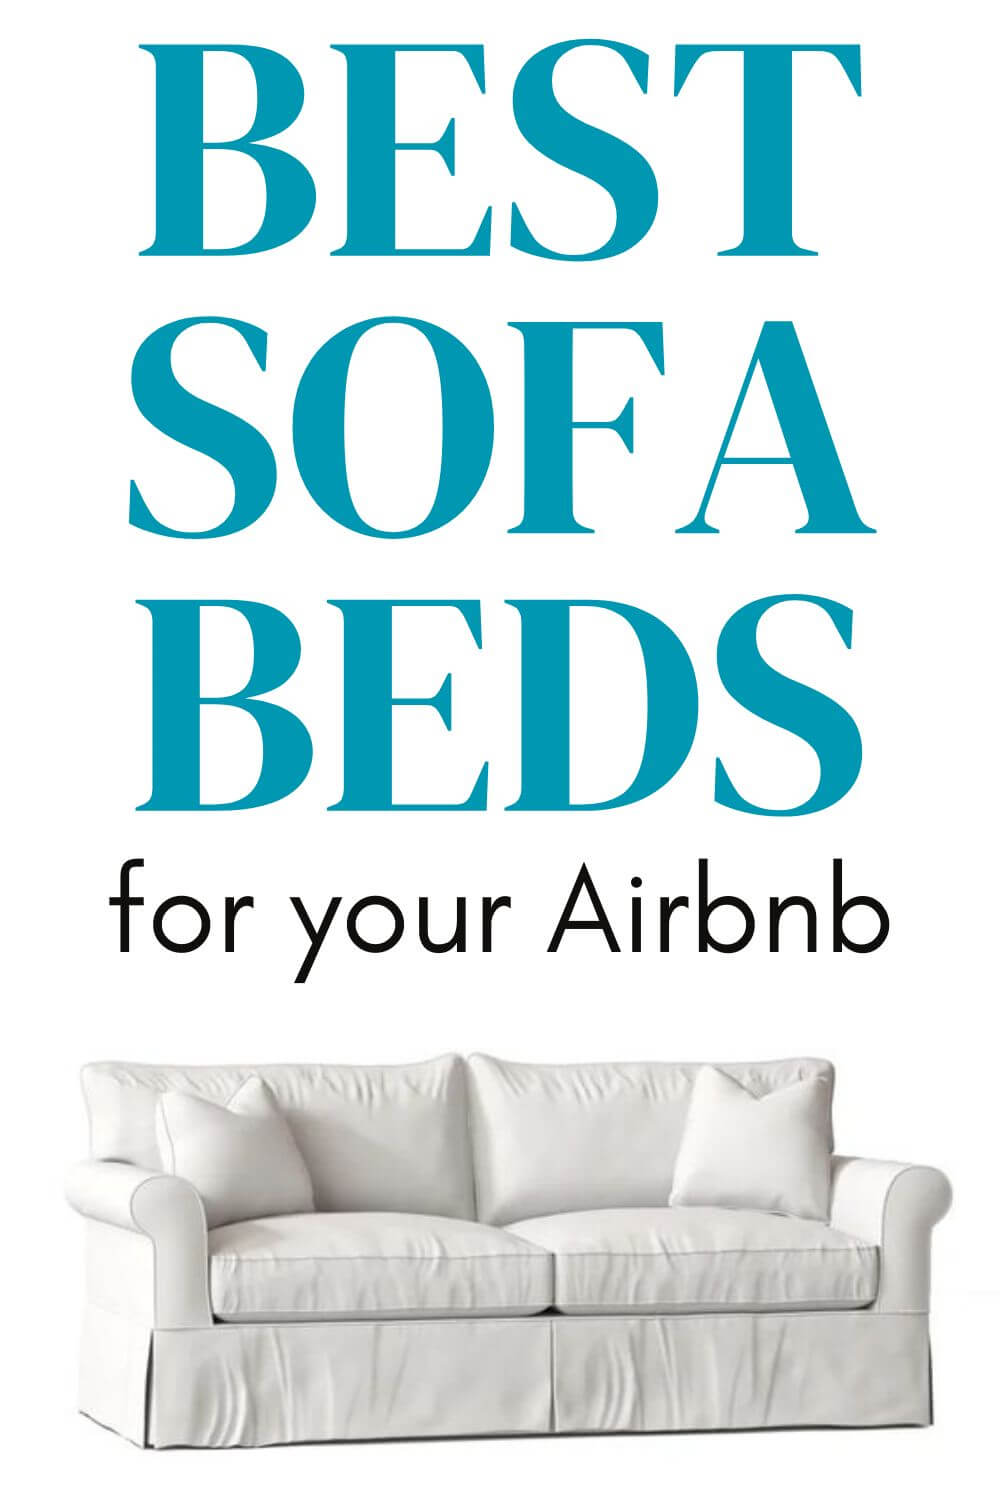 High Rated Sofa Beds For Airbnb STR